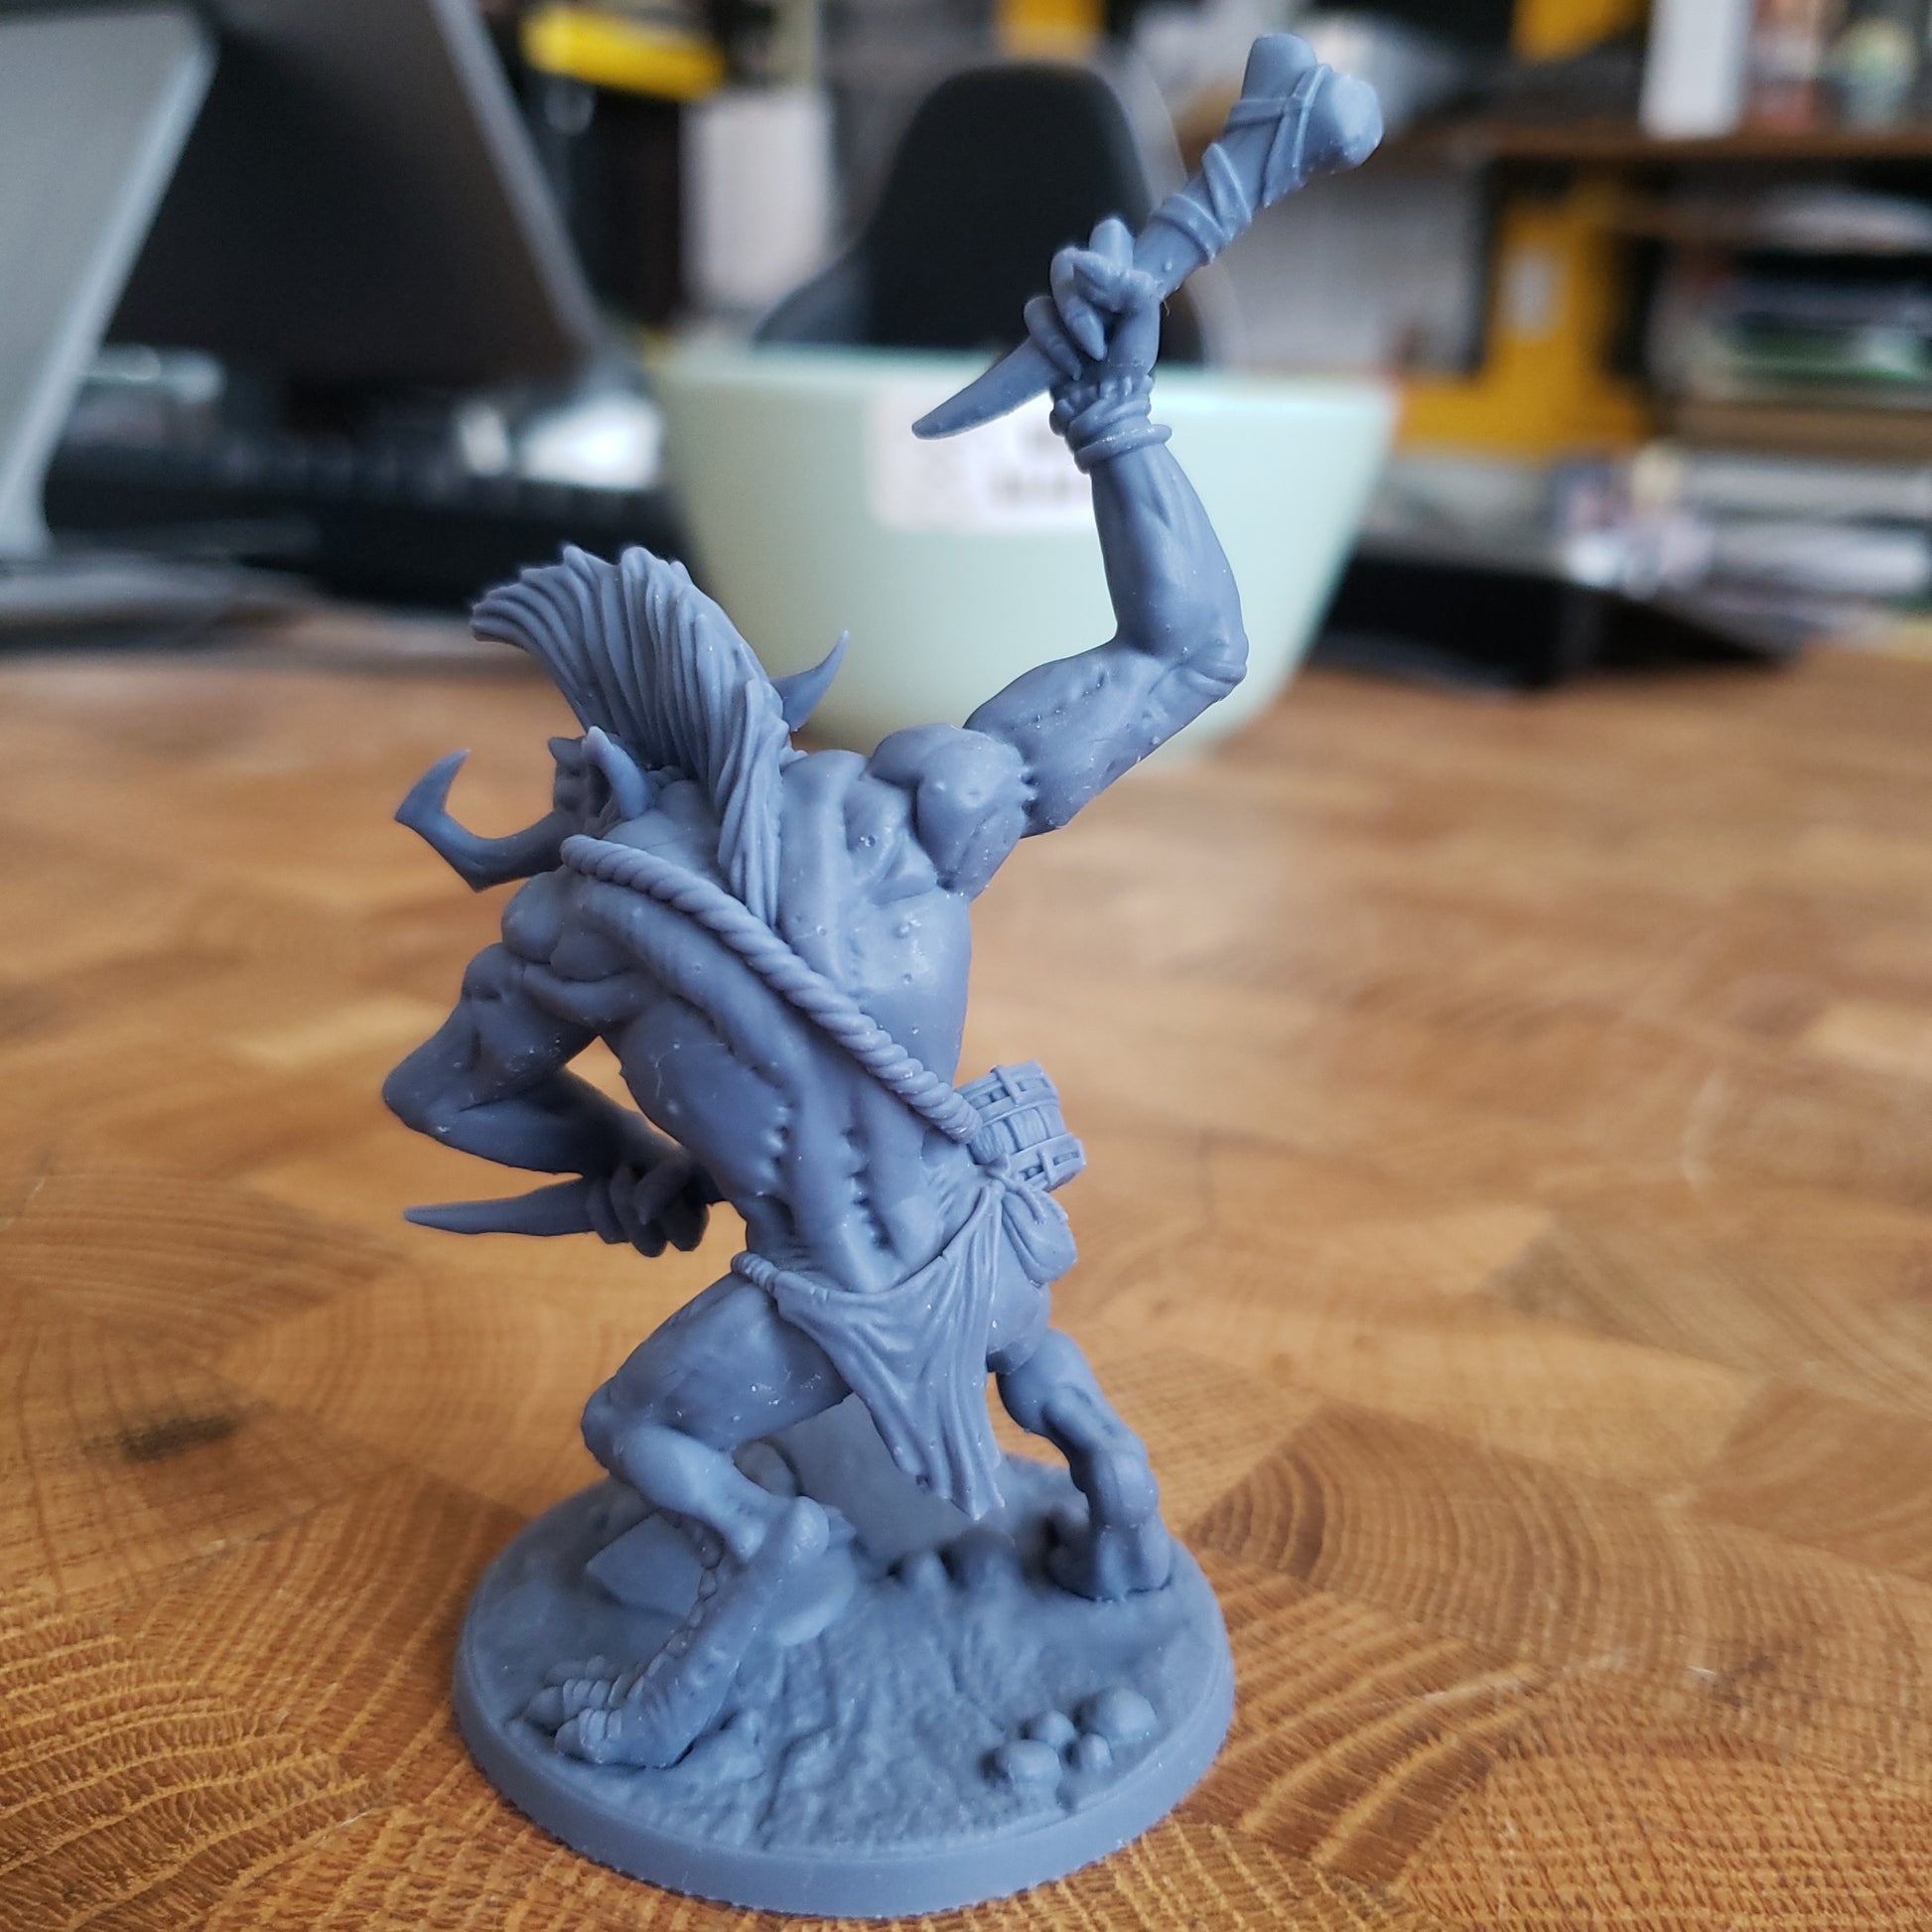 Image shows an example of a 3D printed troll drummer miniature printed in-house at All Systems Go